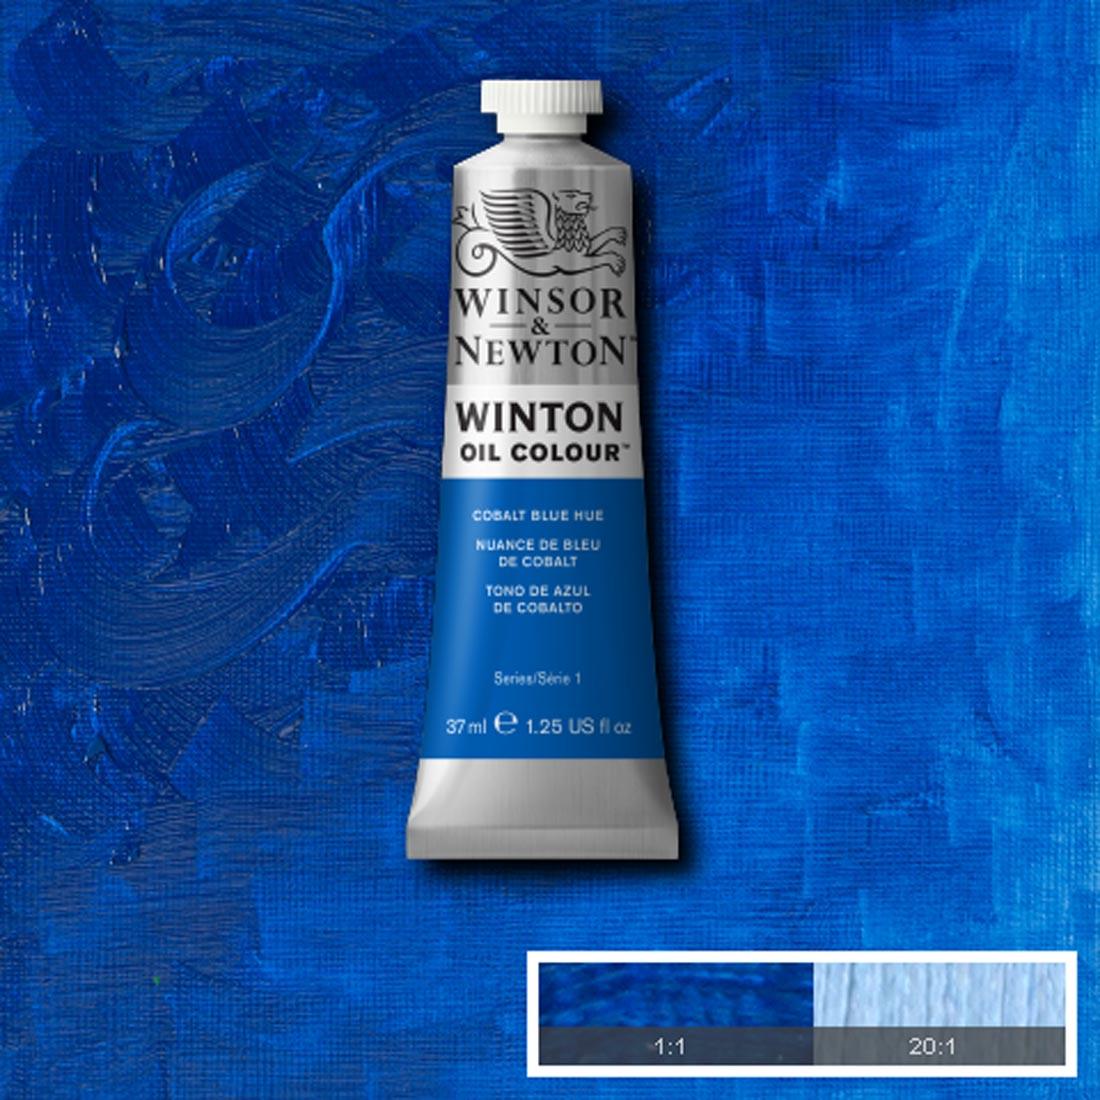 Tube of Cobalt Blue Hue Winsor & Newton Winton Oil Colour with a paint swatch for the background